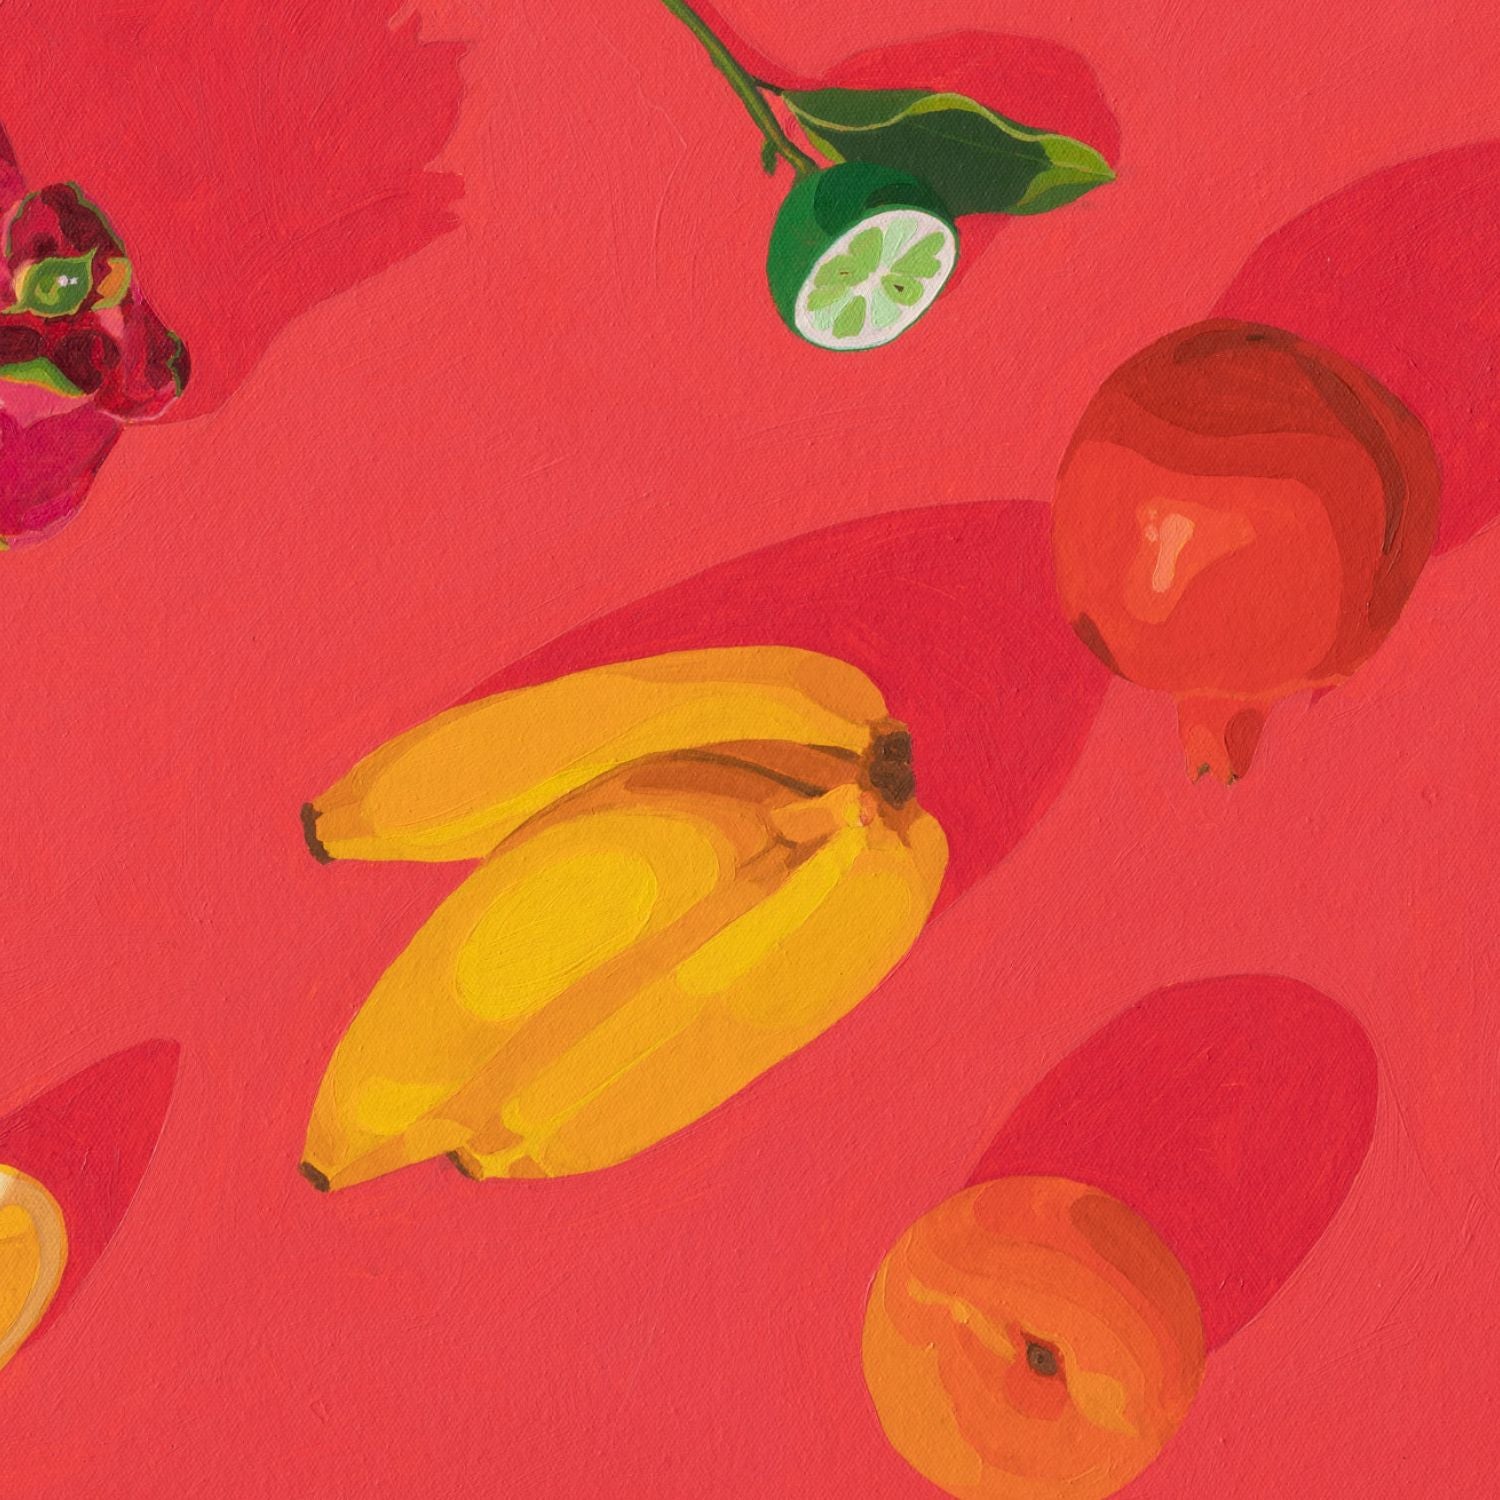 closeup of an original oil painting of fresh fruits like bananas, lemons, dragonfruit, pomegranate, lime and apricot on a vibrant and bright red background with beautiful shadows